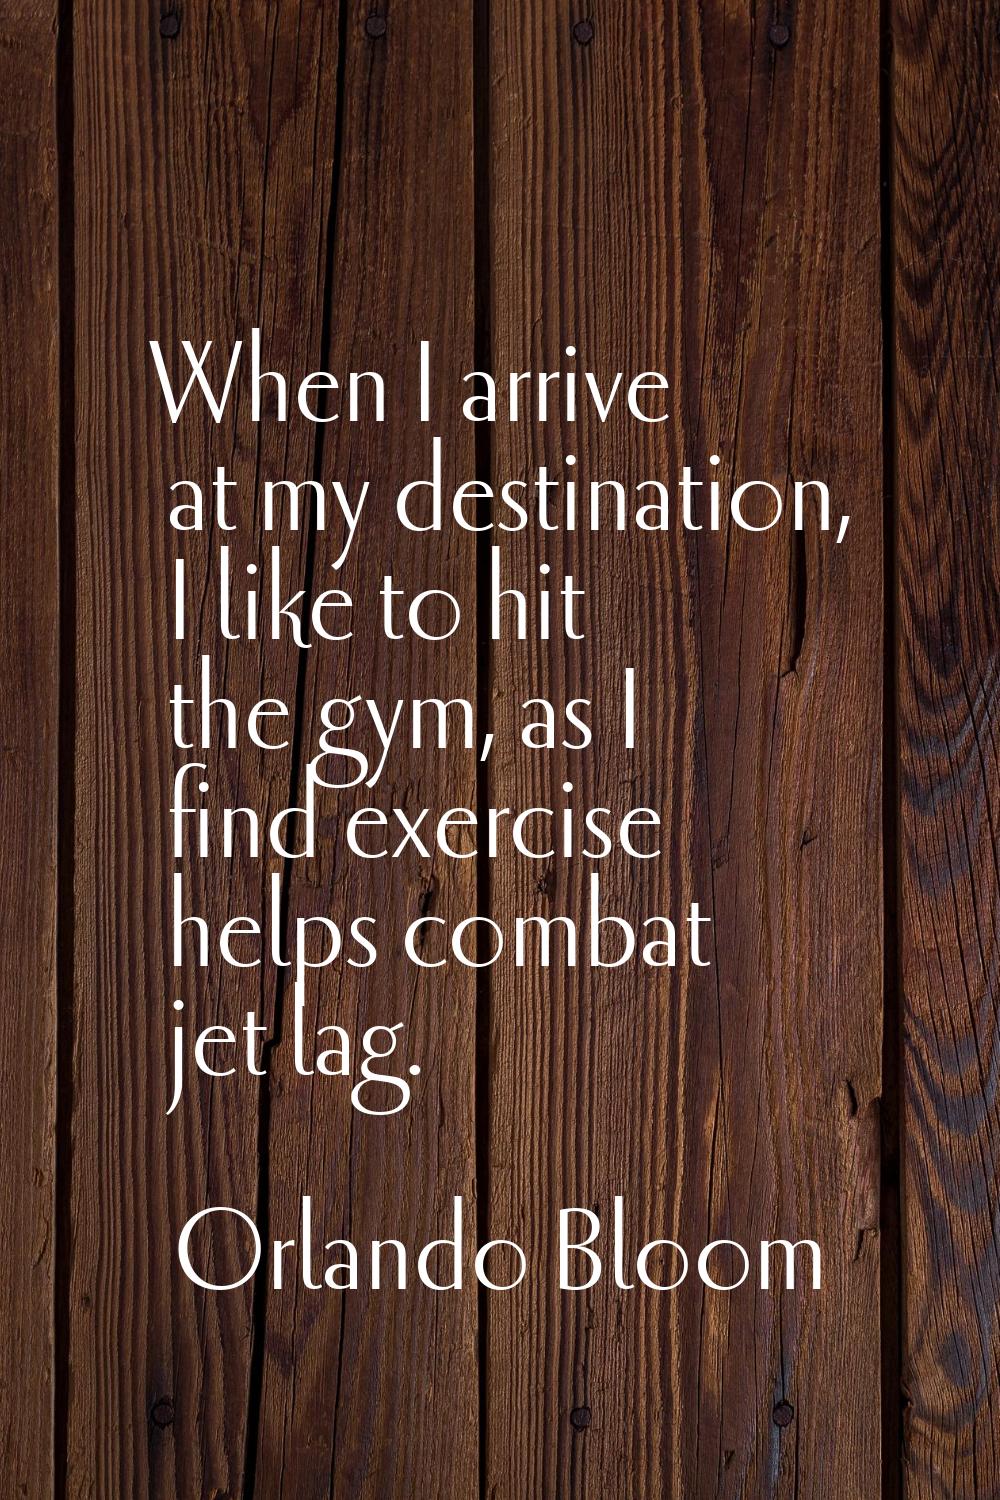 When I arrive at my destination, I like to hit the gym, as I find exercise helps combat jet lag.